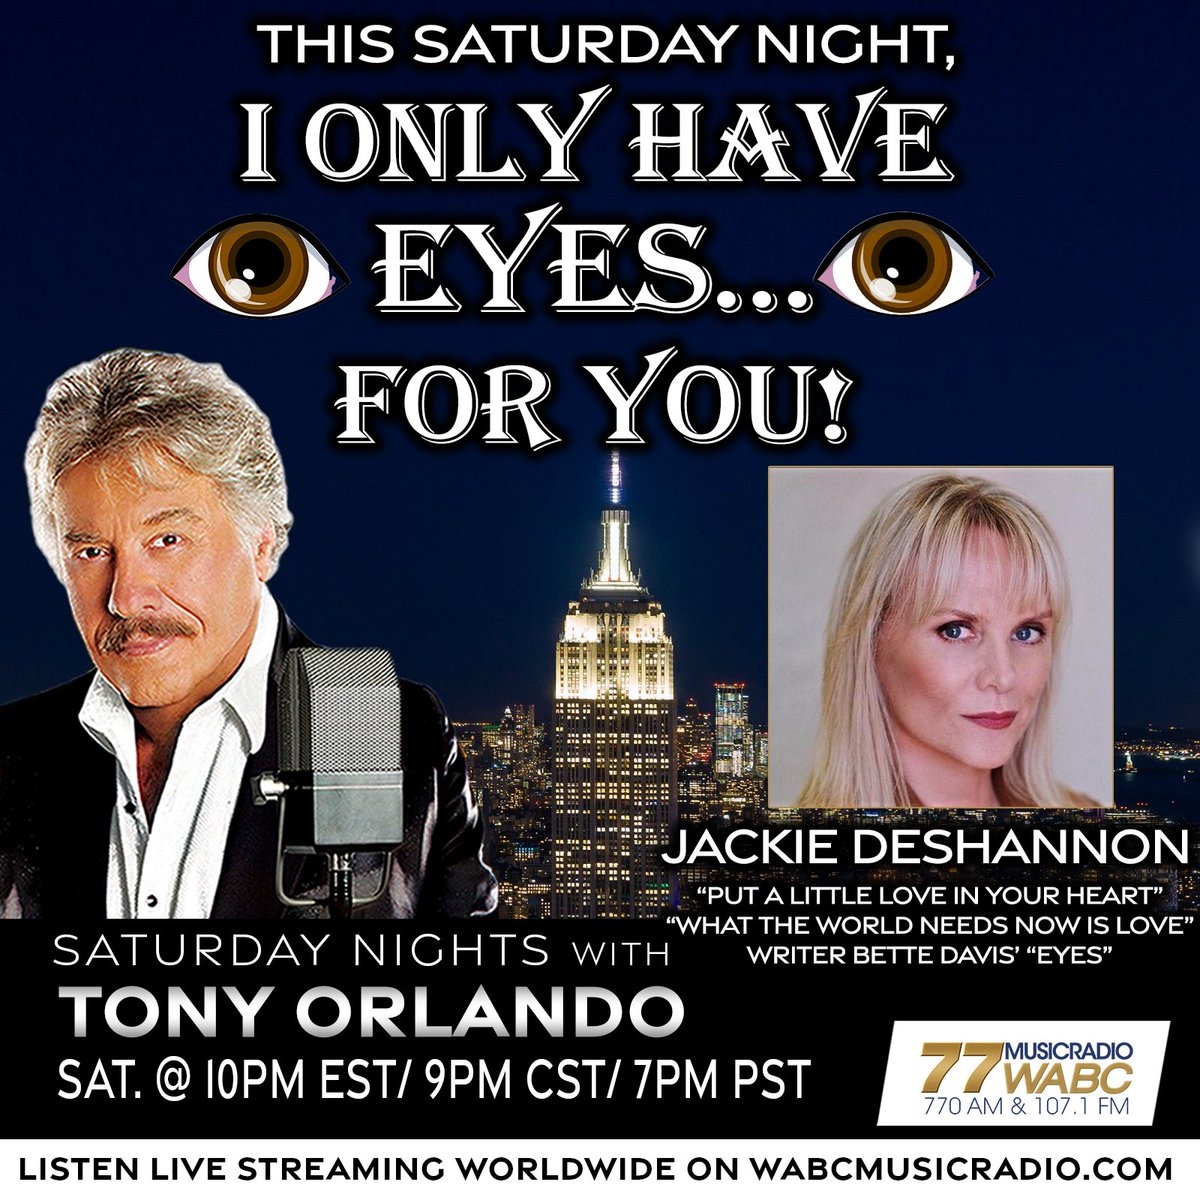 TONIGHT at 10PM: I only have EYES... for YOU! Host @TonyOrlando will have Singer/Songwriter Jackie DeShannon on the show! Join us TONIGHT from 10PM-midnight on wabcmusicradio.com, 770 AM, or on the 77 WABC app! #77WABCRadio #Music #TonyOrlando